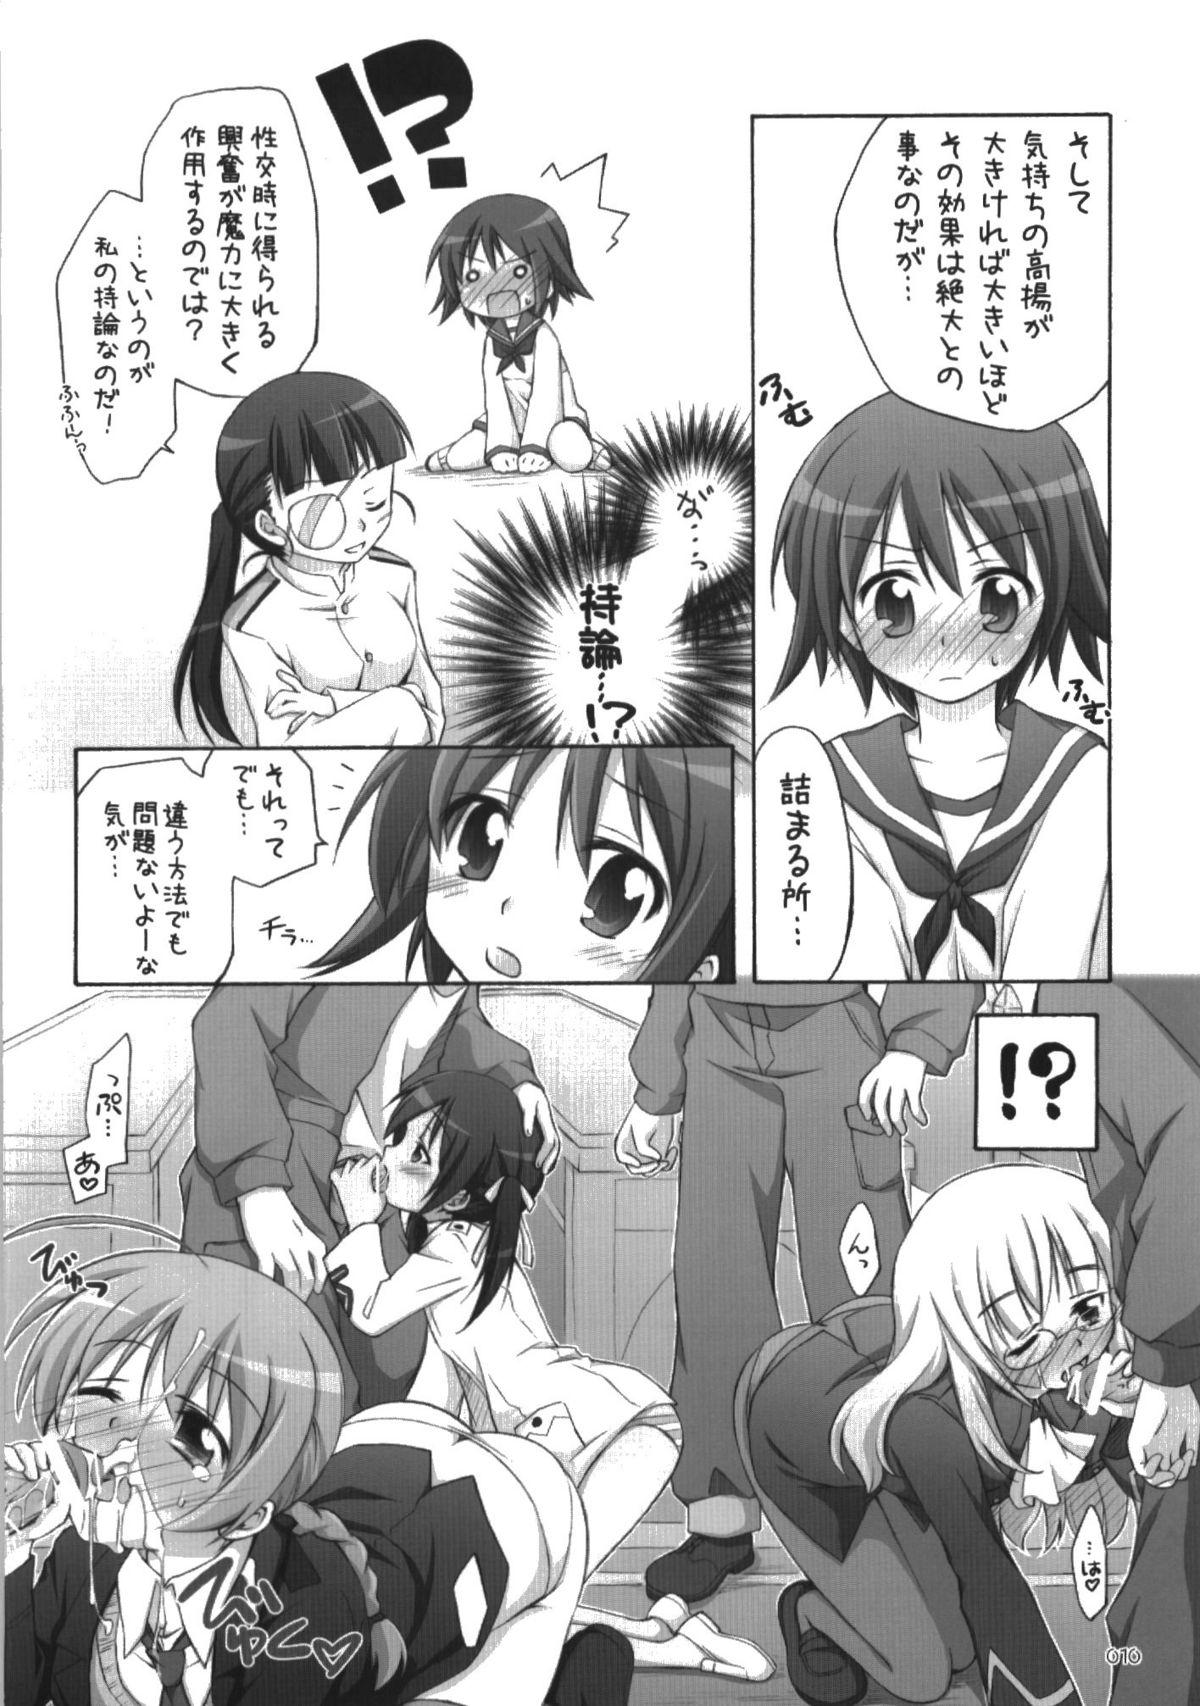 Big breasts s.n.e.g? - Strike witches Tiny Titties - Page 10